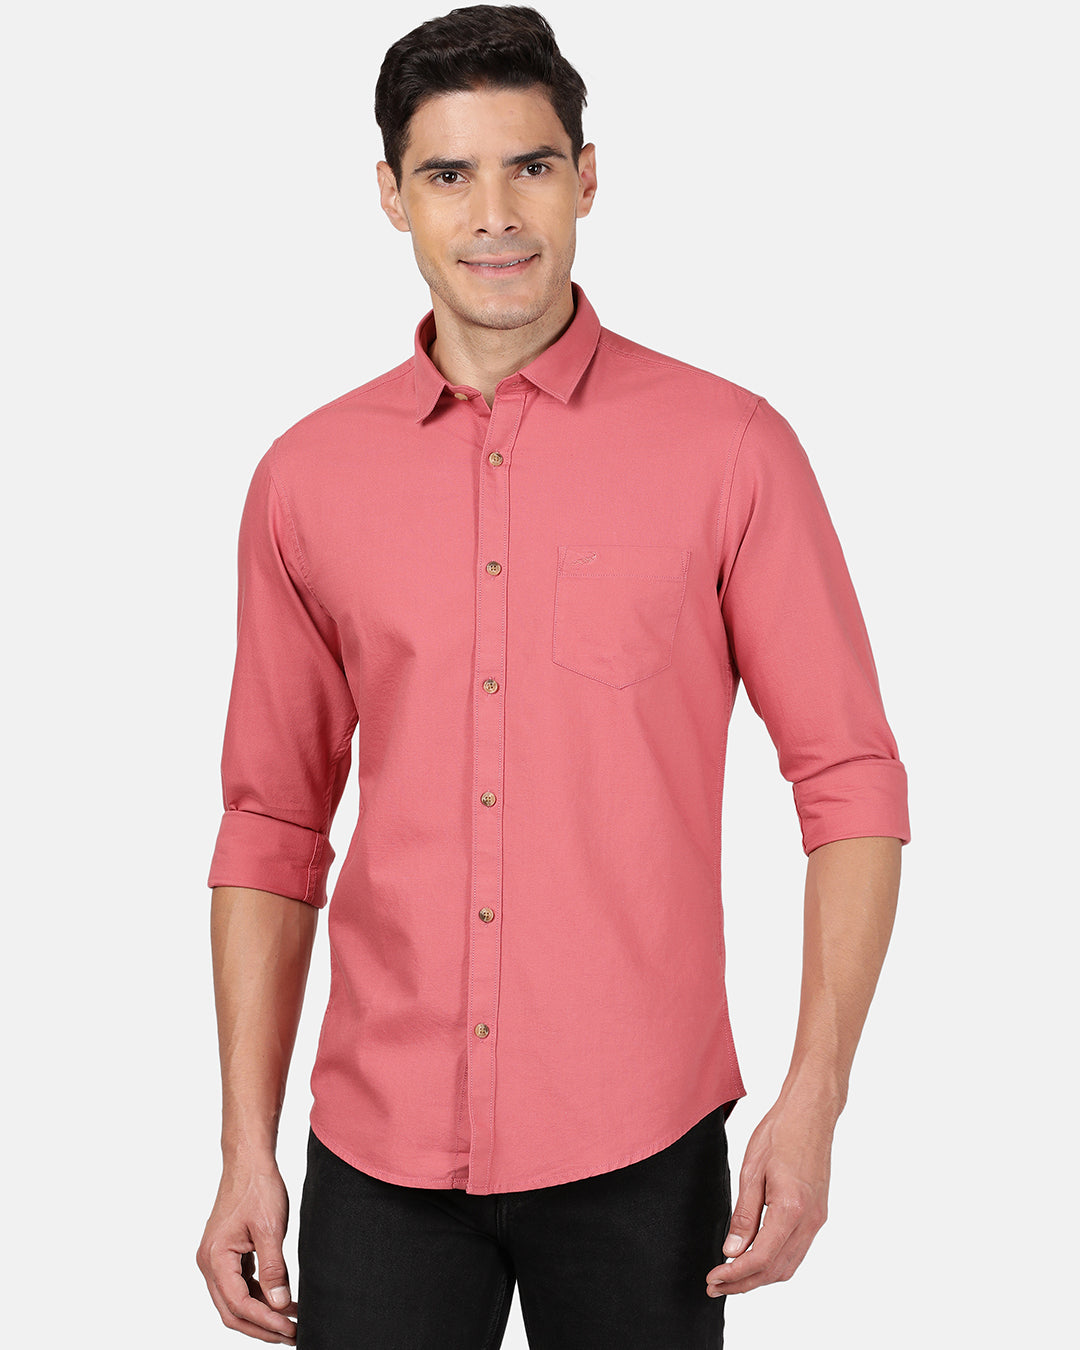 Crocodile Casual Full Sleeve Slim Fit Solid Coral with Collar Shirt for Men